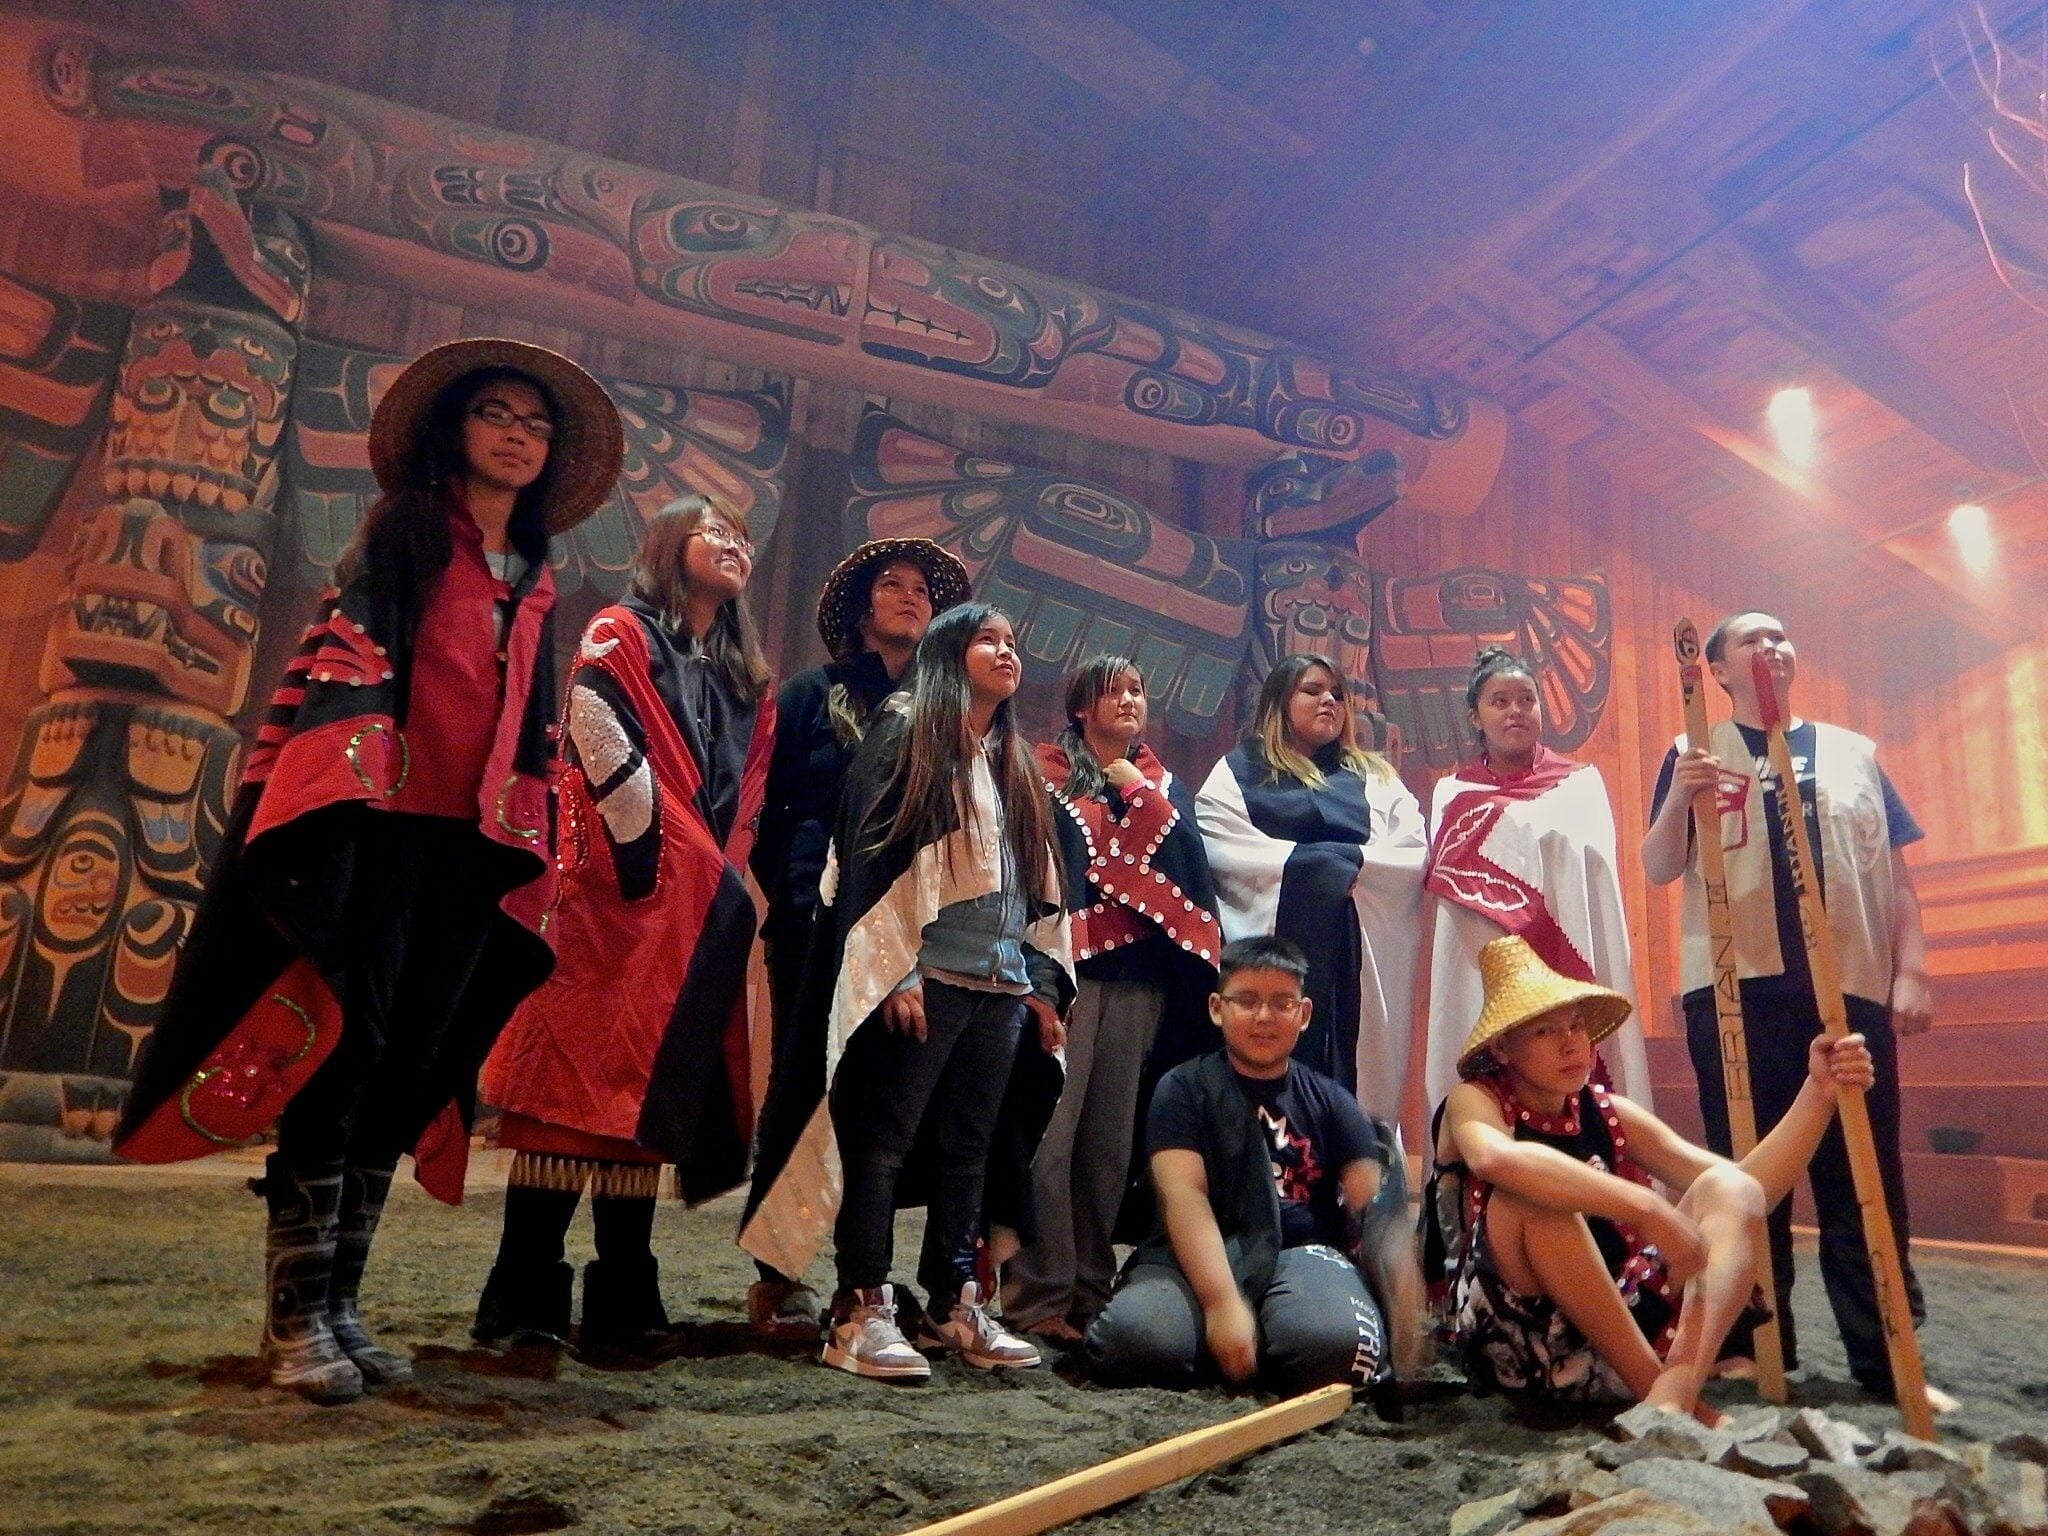 The Súa Performance Group was started by local youth with a keen interest in interacting with local tourism and maintaining the Kitasoo/Xai'Xais tradition of performance. Photo by Mike Brown courtesy of Spirit Bear Lodge.